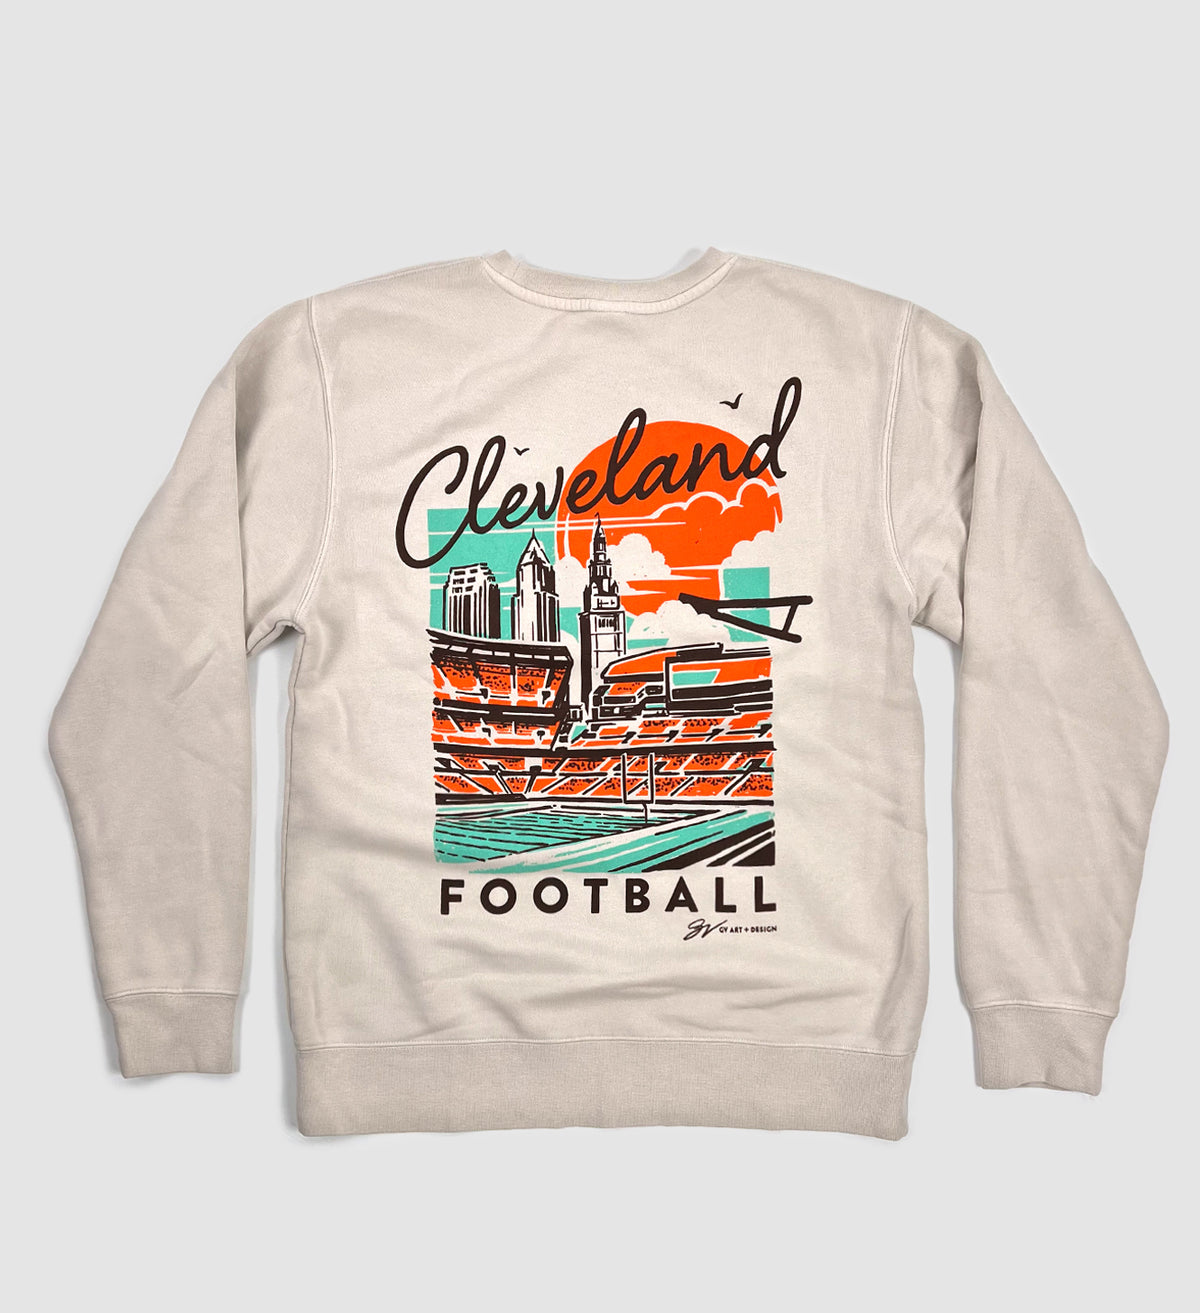  Cleveland Versus the World - Brown Block Letters - Sweatshirt :  Clothing, Shoes & Jewelry